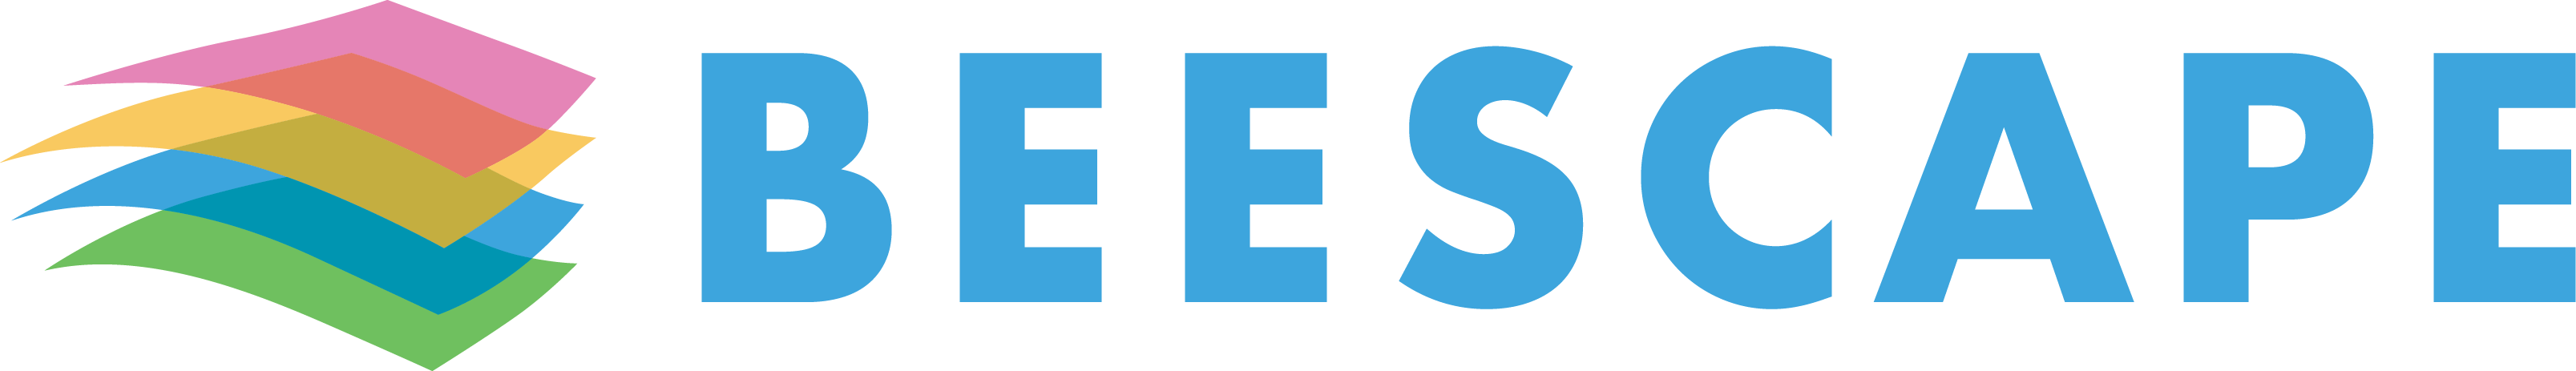 Logo with word "Beescape" next to 4 colored shapes representing layers of a map